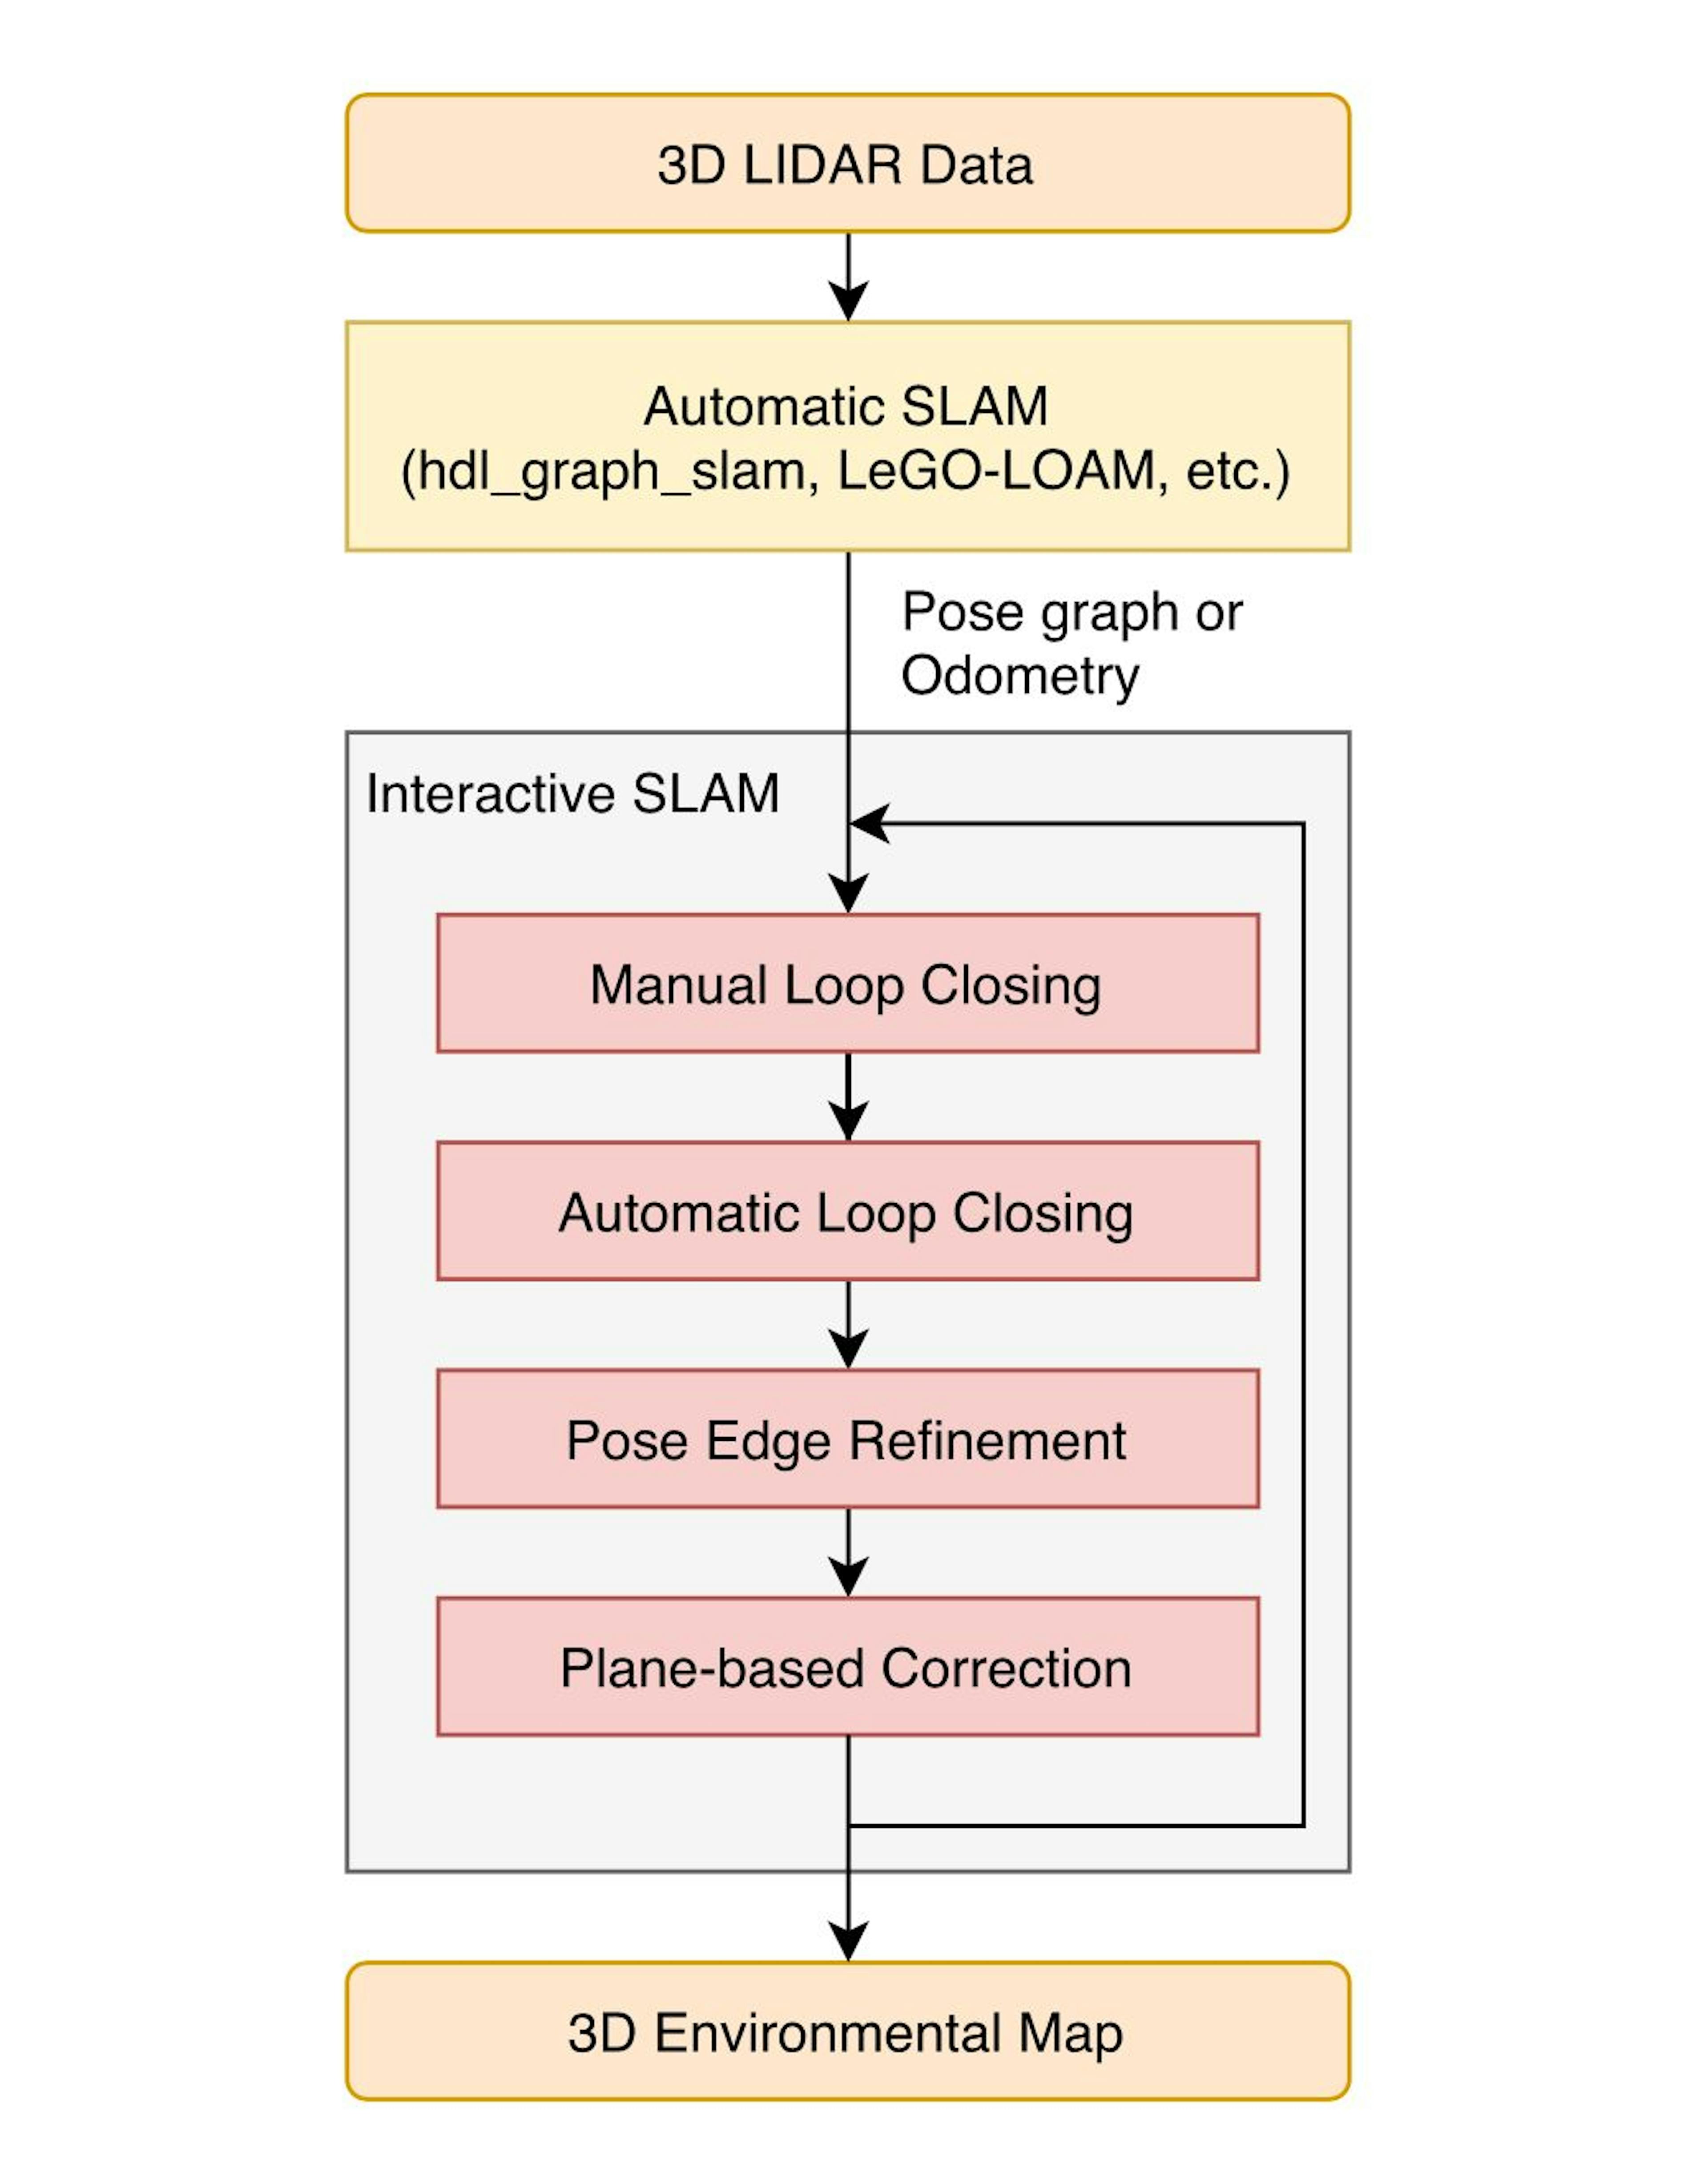 Figure 5. The interactive framework for mapcorrection proposed in the article